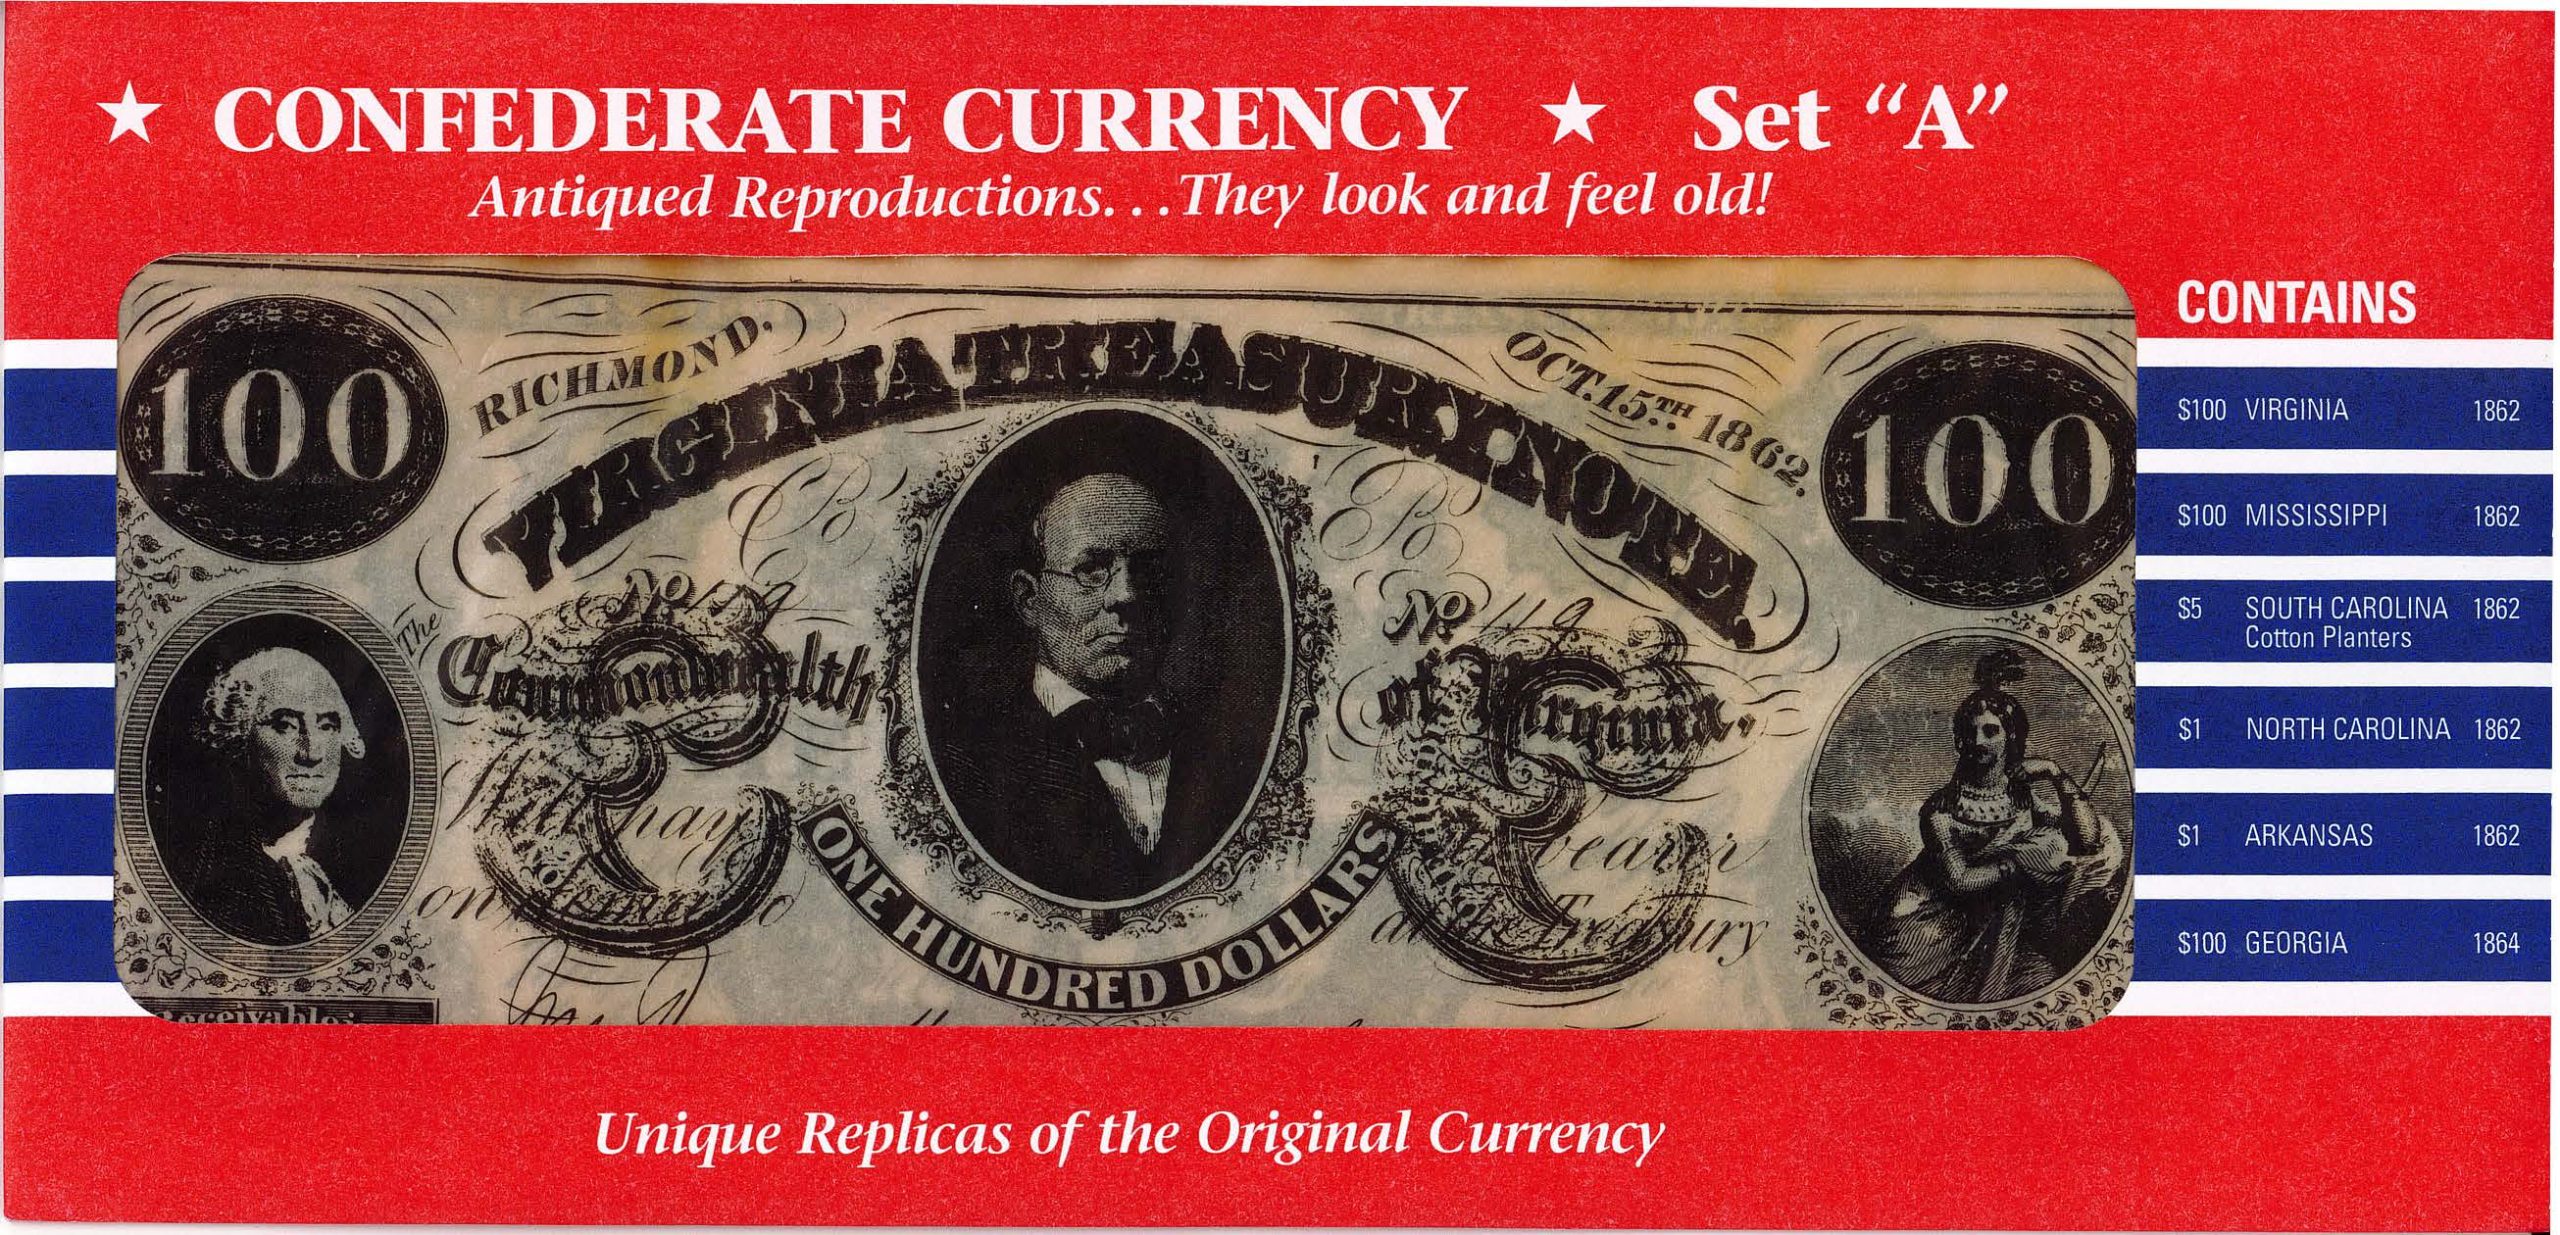 Documents- Confederate Currency “A”